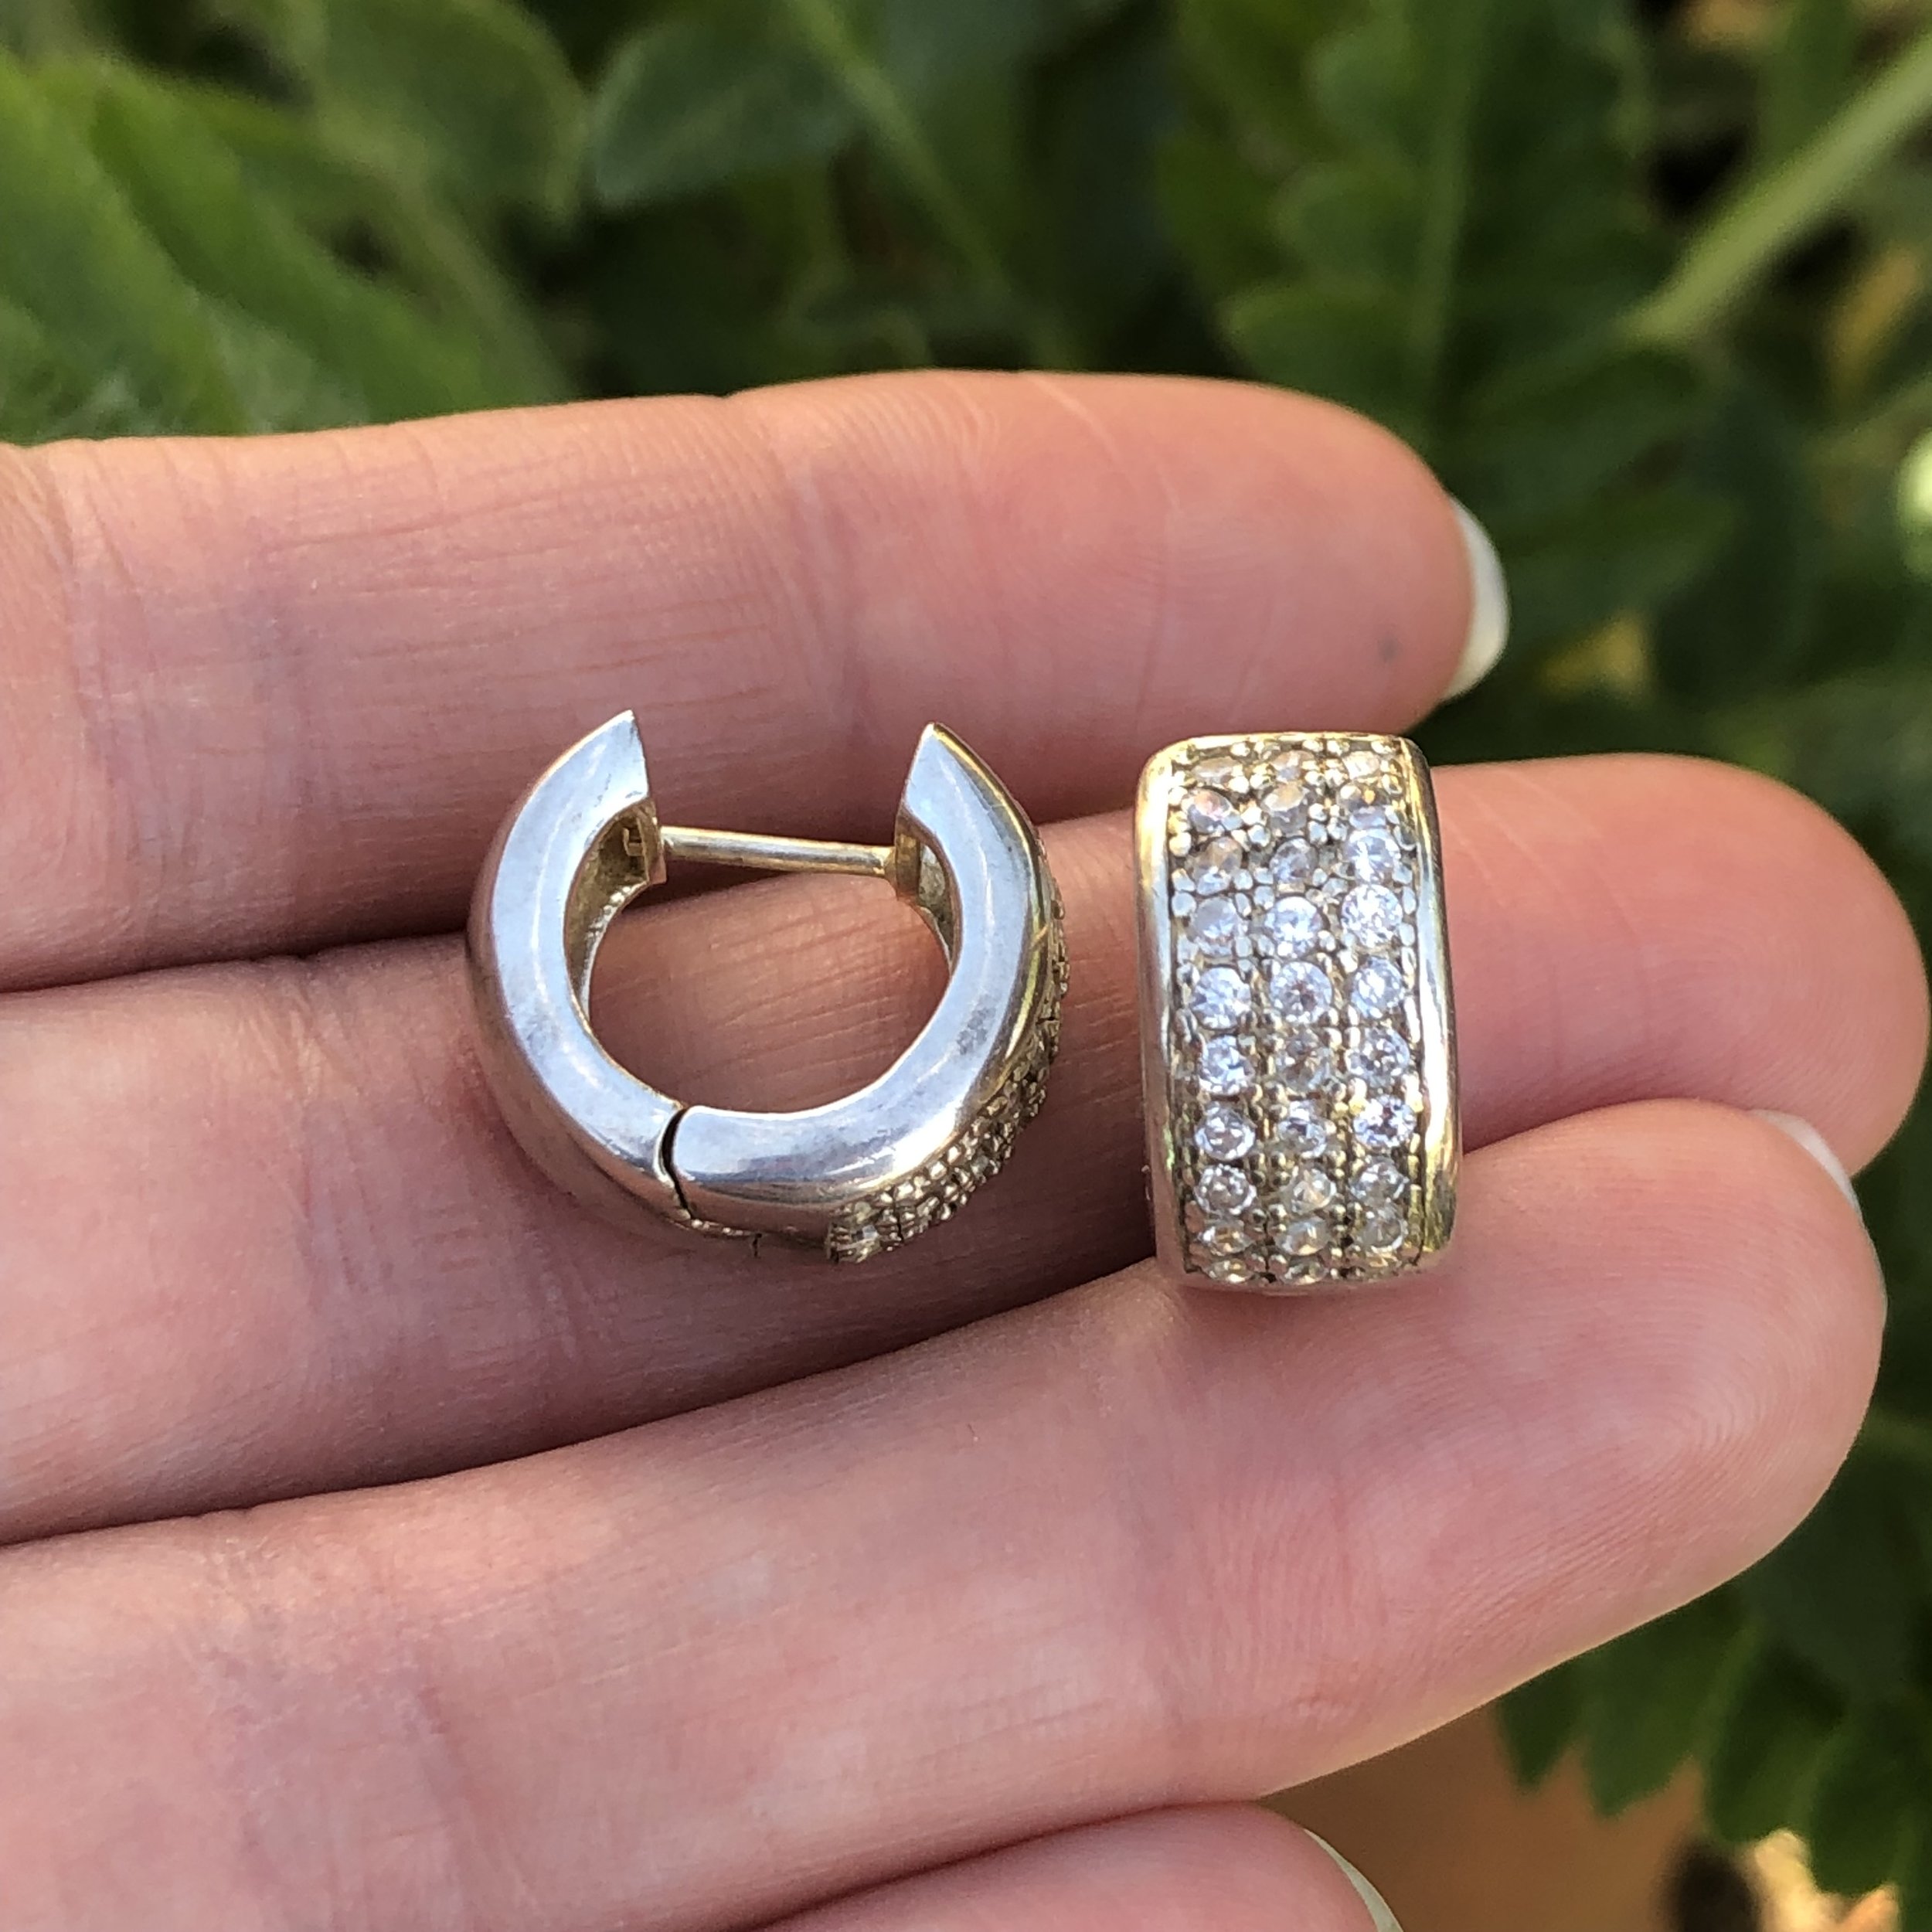 Stainless Steel Crystal Diamond Chakra Hoop Earrings For Men And Women  Sterling Silver And 14K Rose Gold Stainless Steel Stud Earrings From  Goodlinessjewelry, $1.3 | DHgate.Com